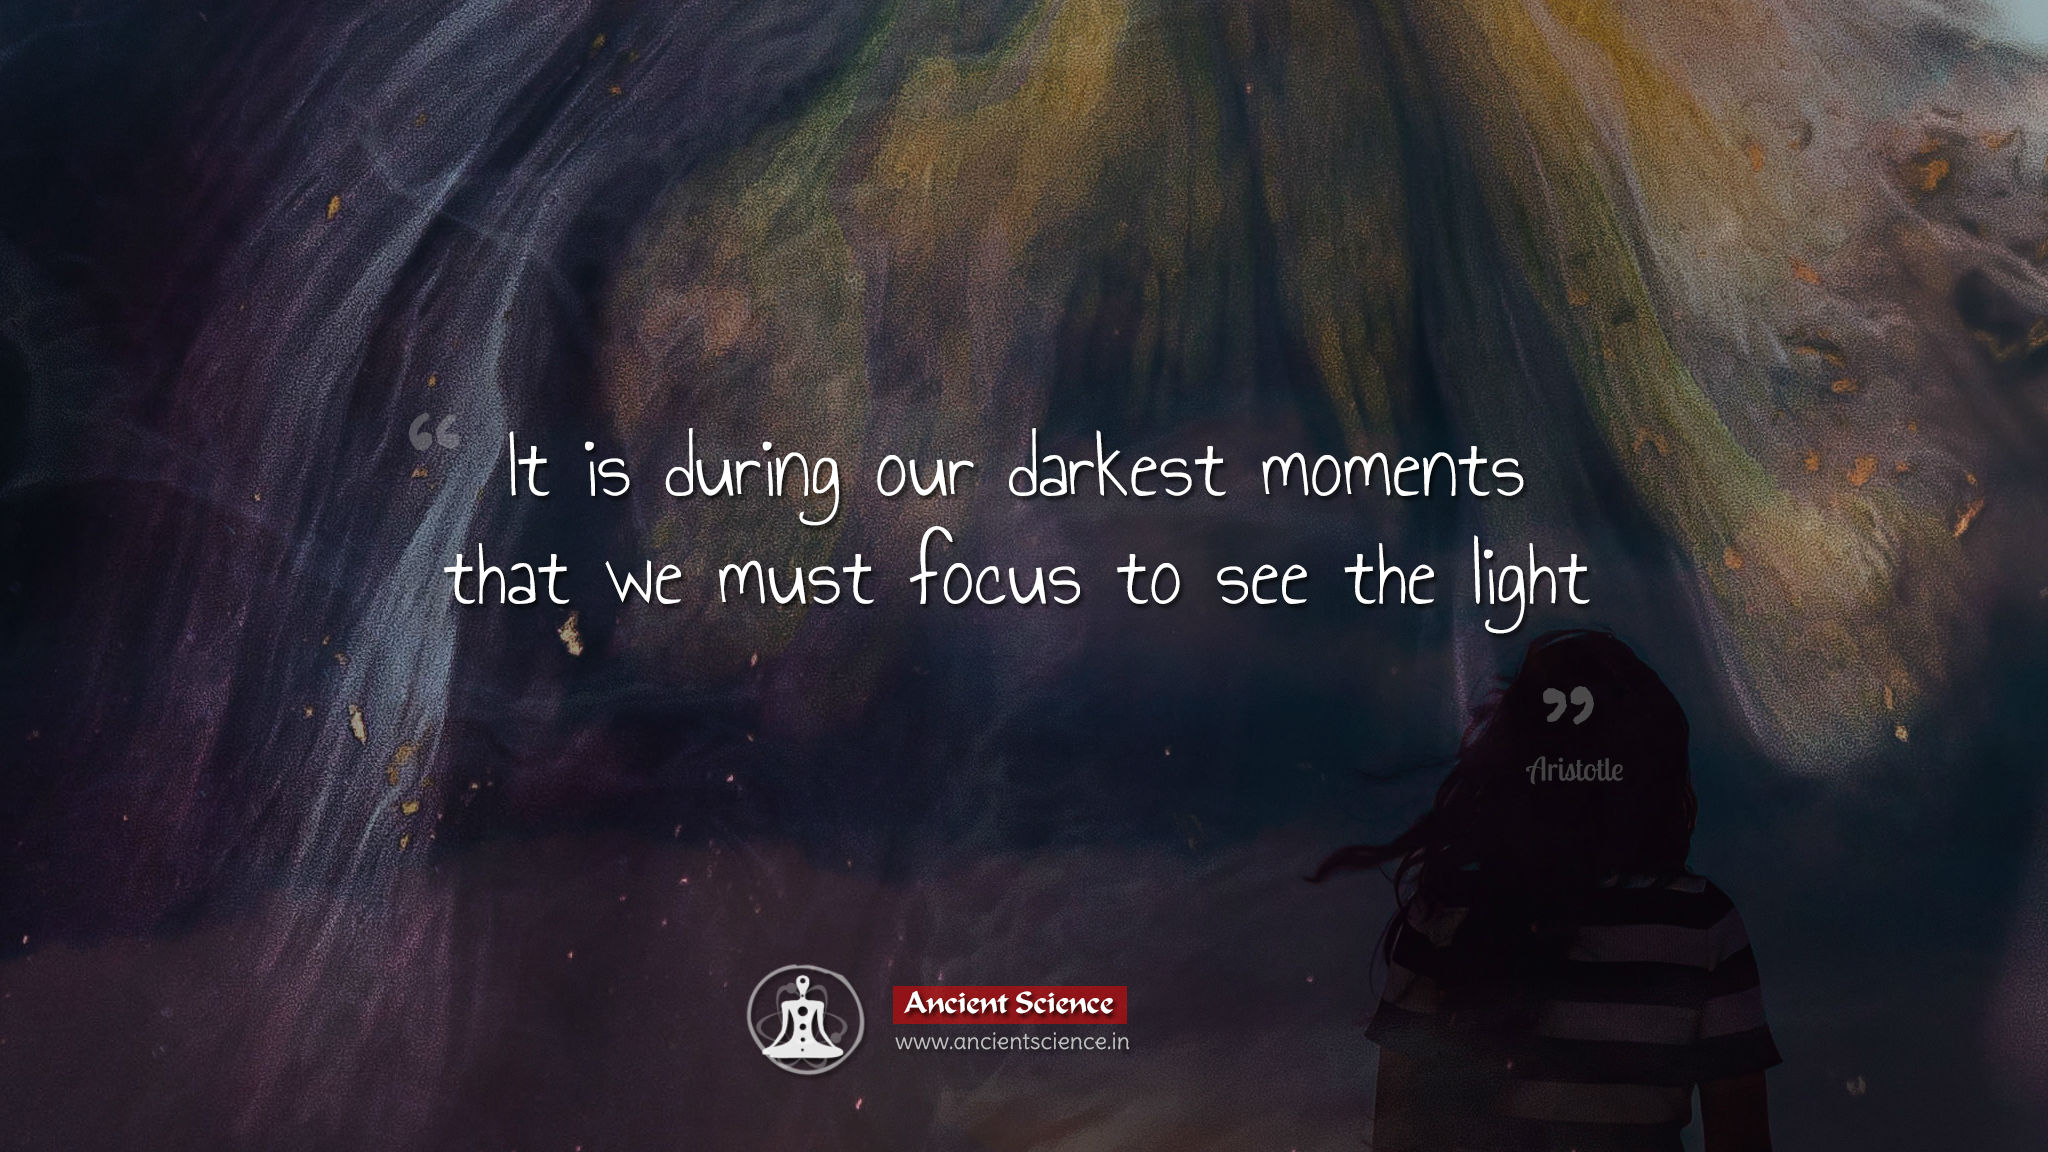 It is during our darkest moments that we must focus to see the light